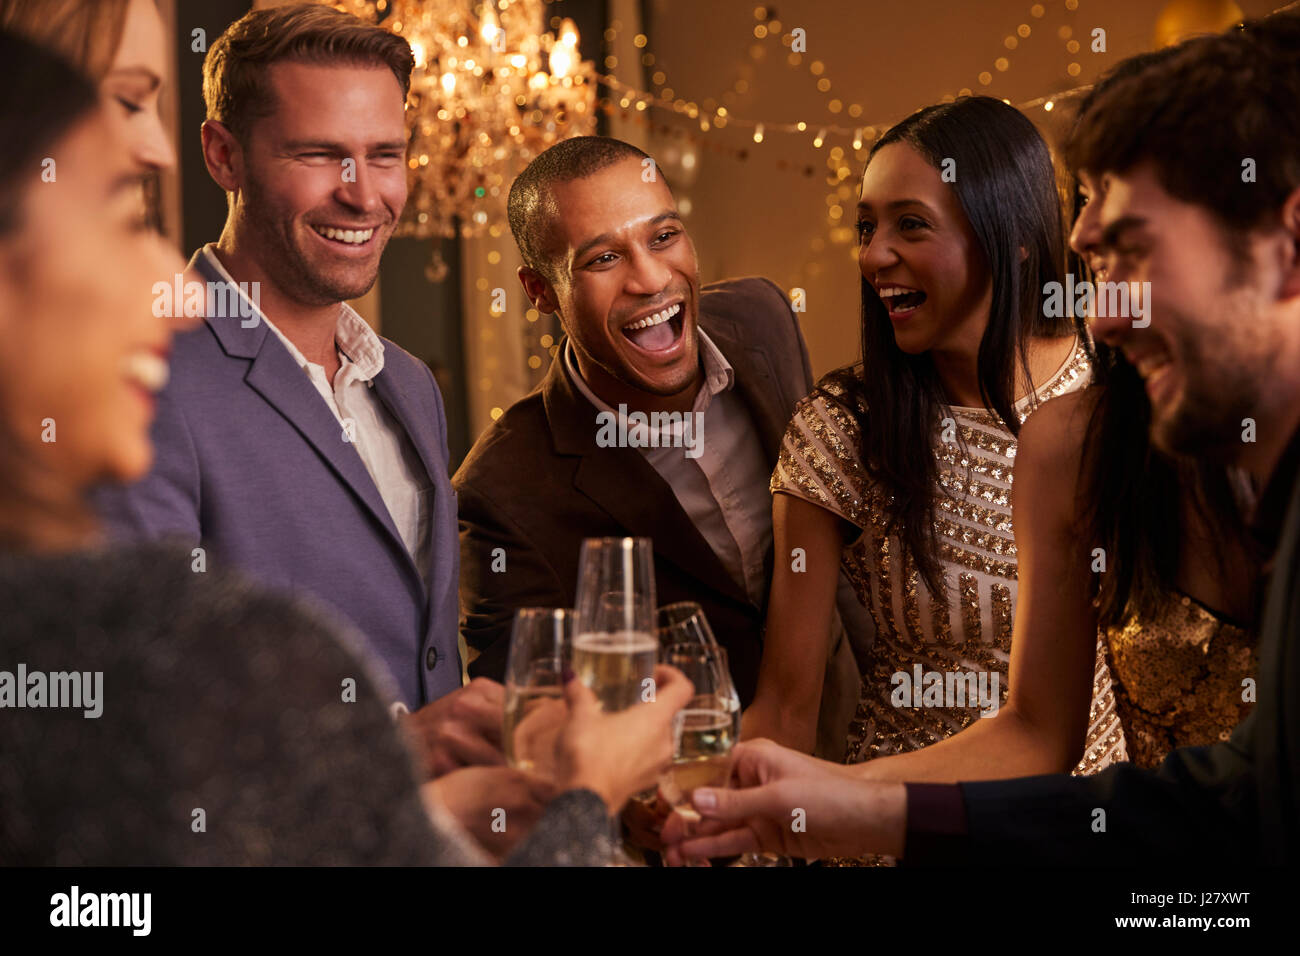 Friends Make Toast As They Celebrate At Party Together Stock Photo